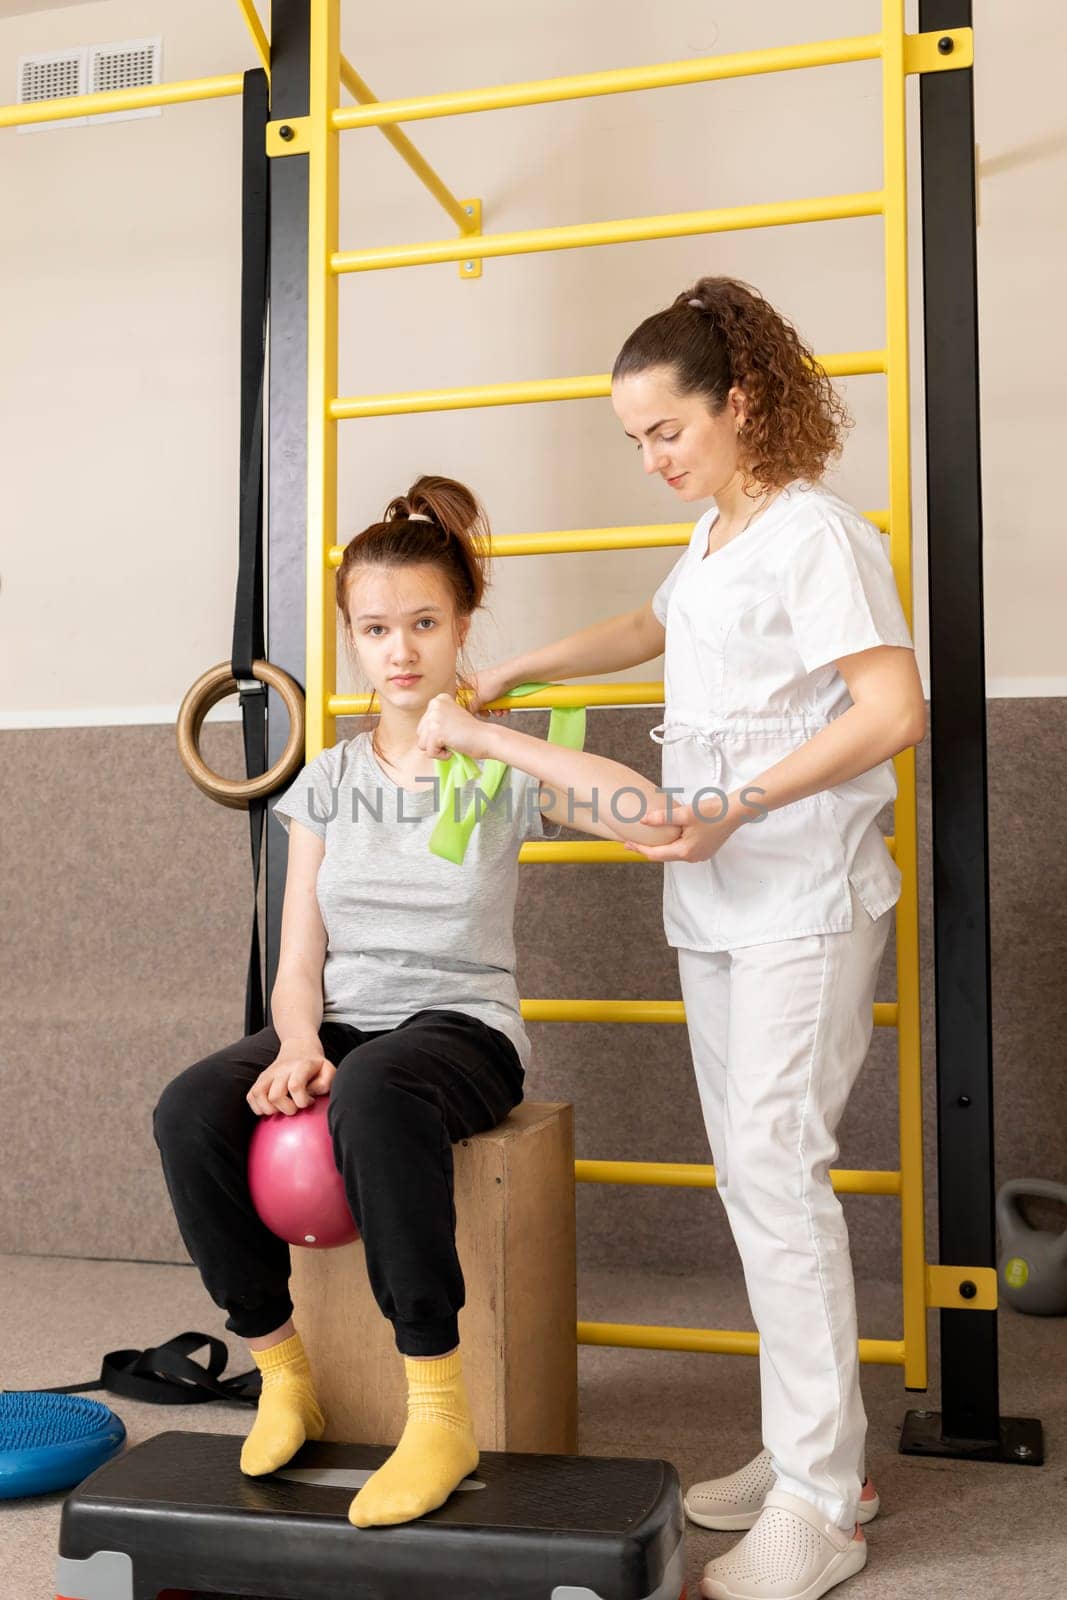 Disabled Child With Doctor Does Physical Exercises In Rehabilitation Room. Kid With Special Needs. Rehabilitation. Cerebral Palsy. Motor Disorder. Vertical plane. High quality photo